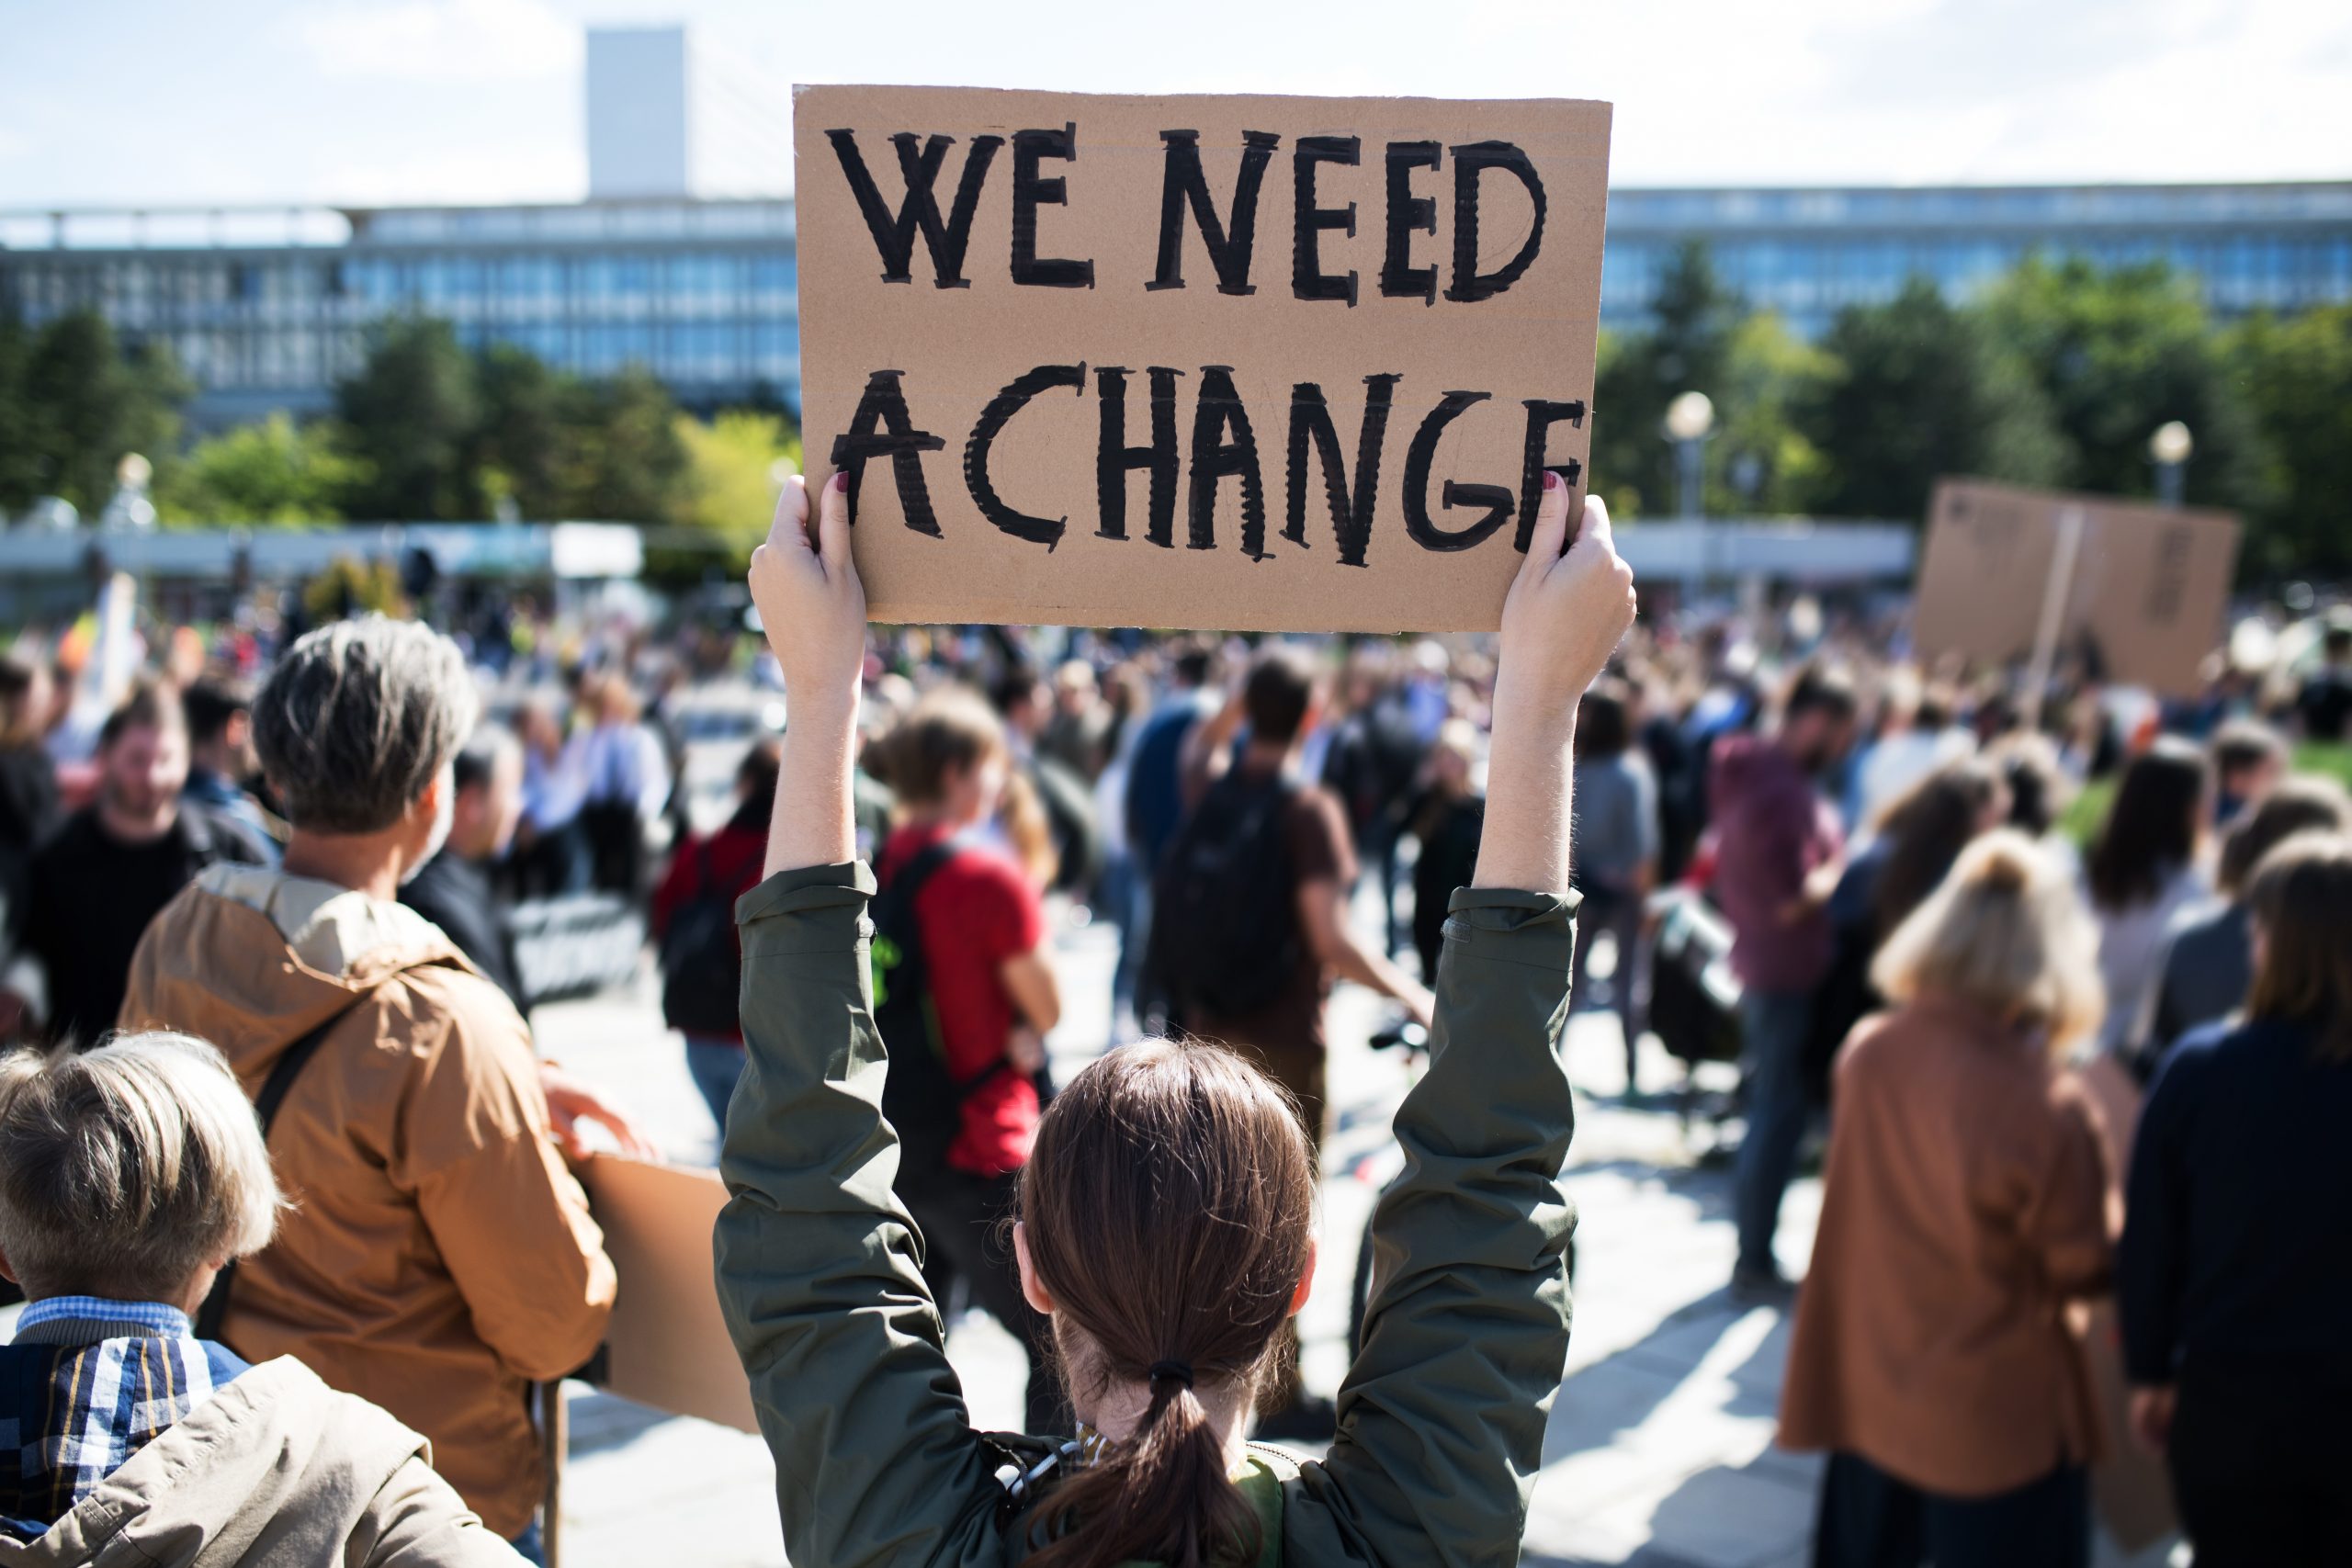 "We Need A Change" sign at a large protest